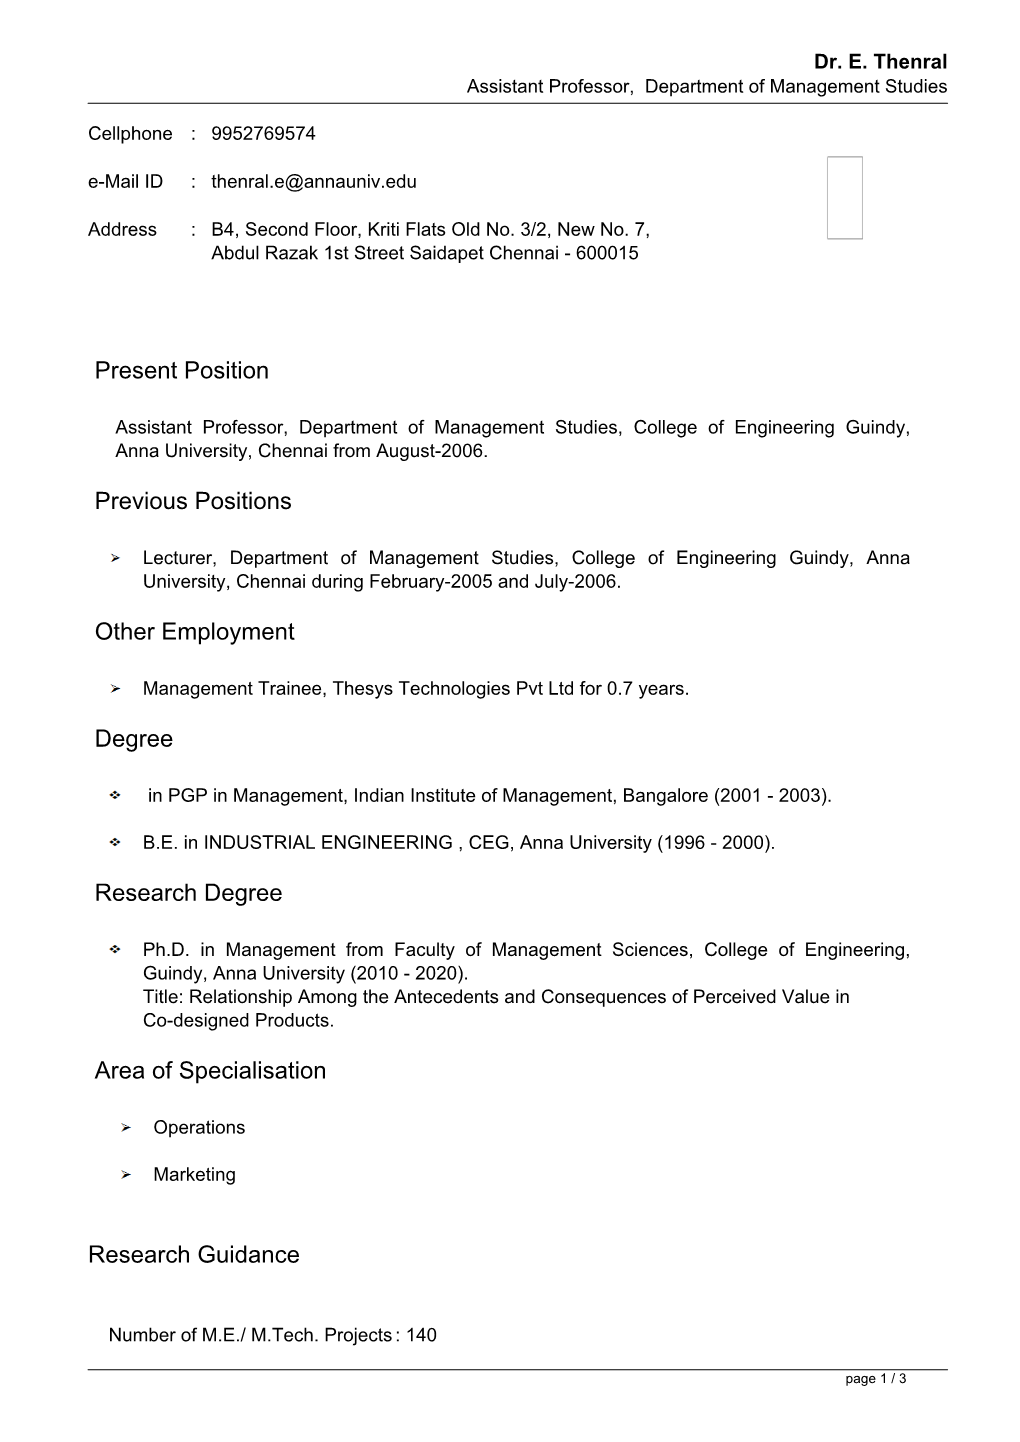 Present Position Previous Positions Other Employment Degree